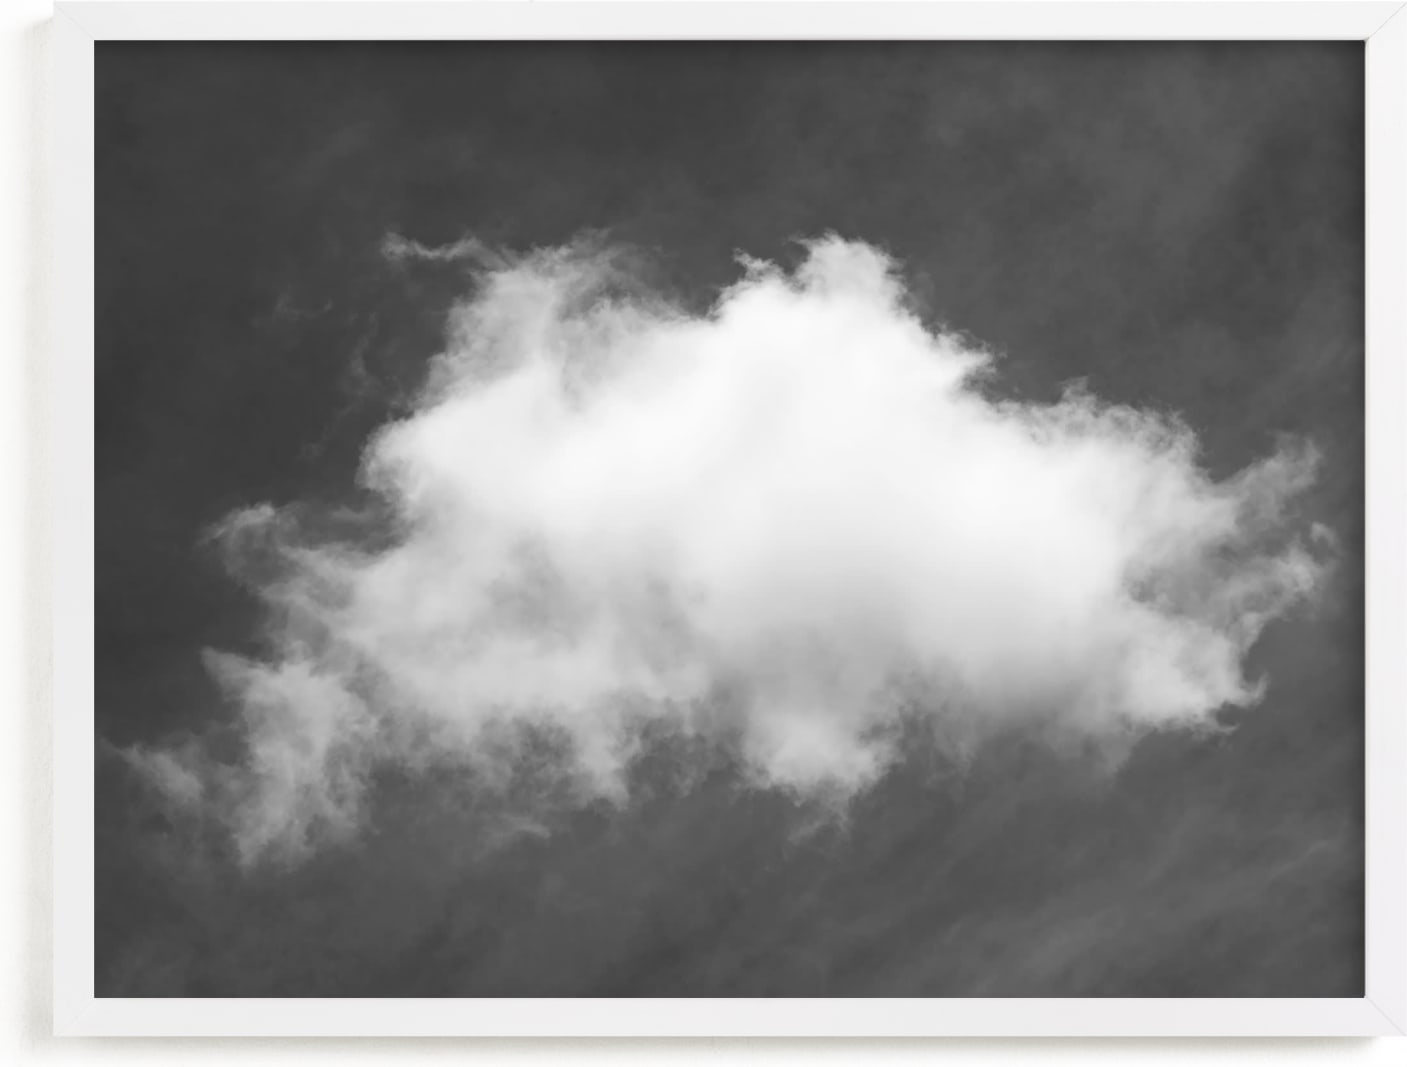 This is a black and white art by Tania Medeiros called Cloud in the Sky.